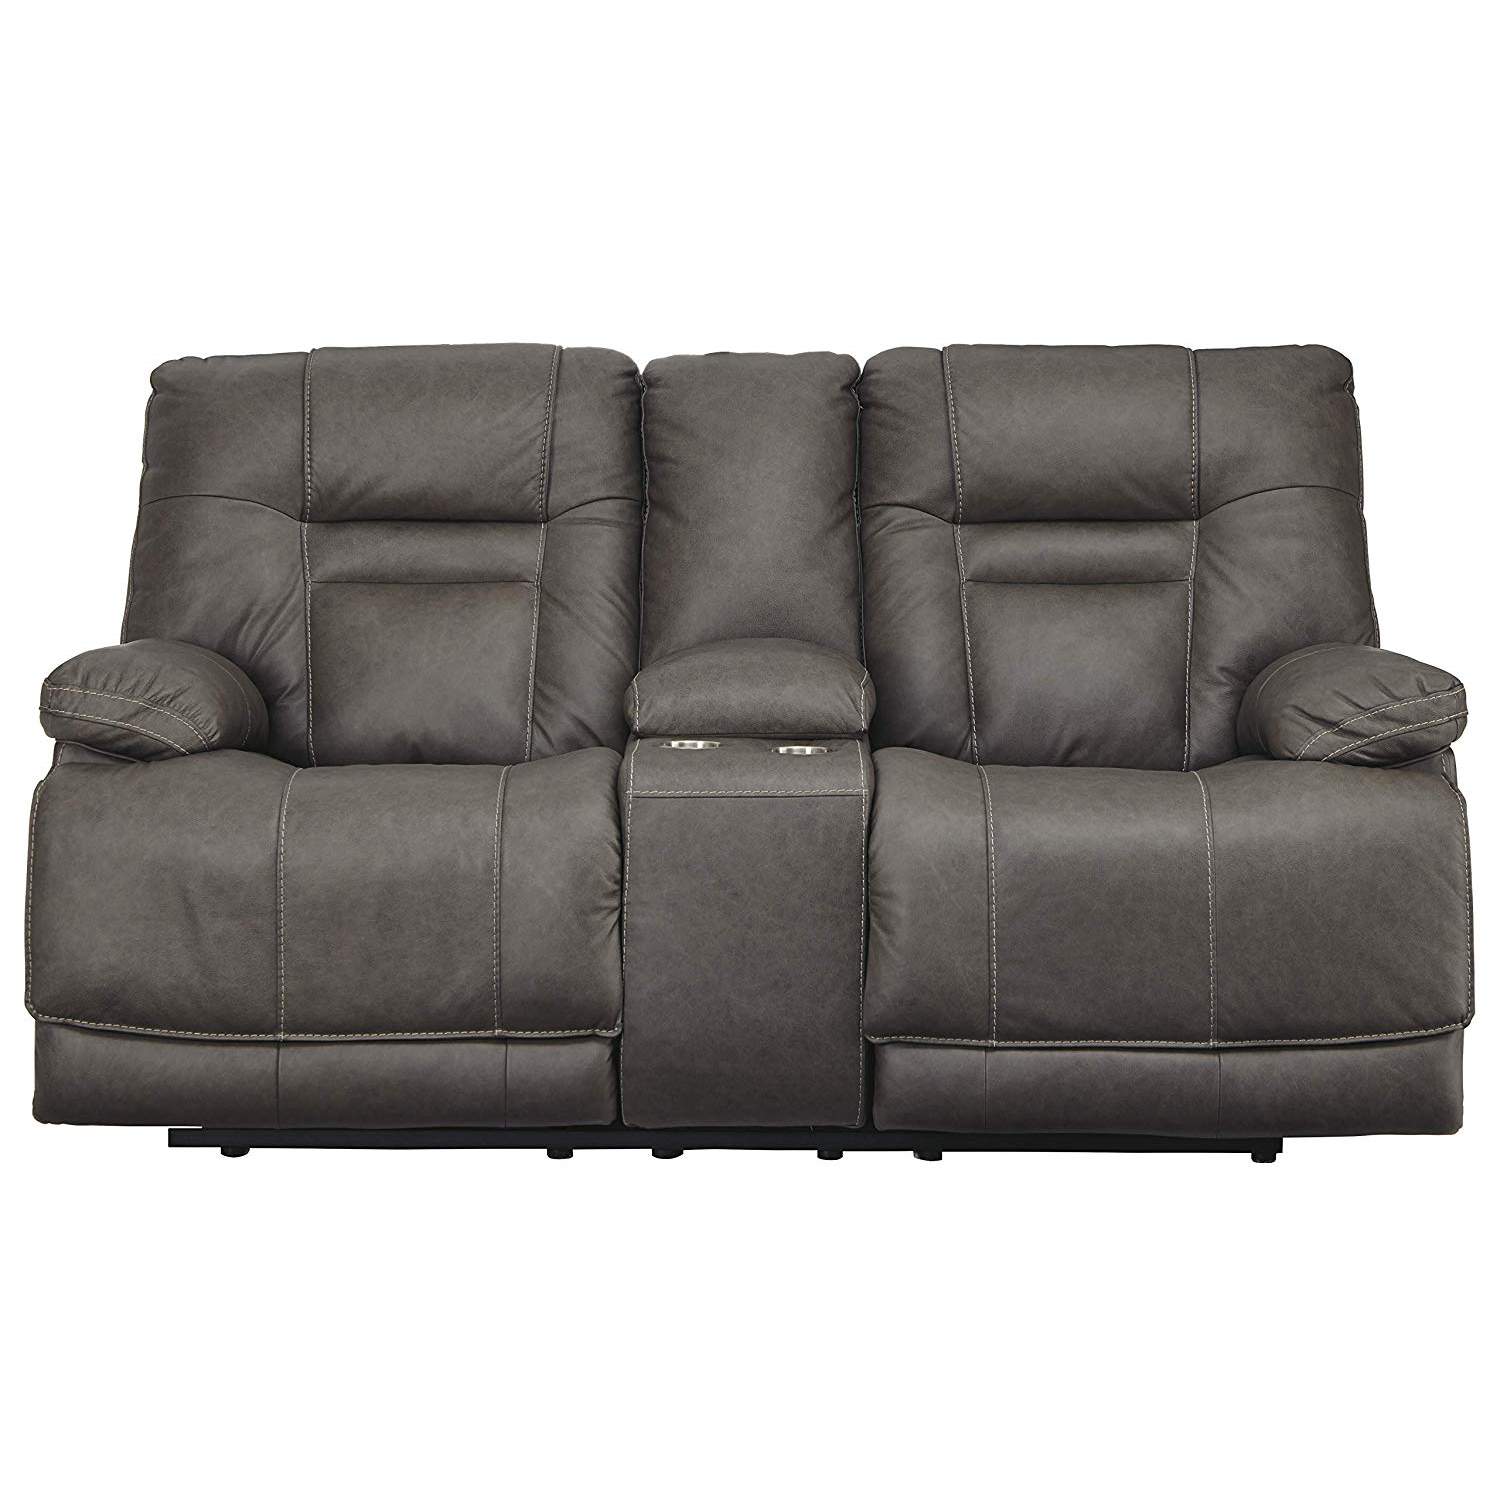 Signature Design by Ashley Wurstrow Power Reclining Loveseat with Console